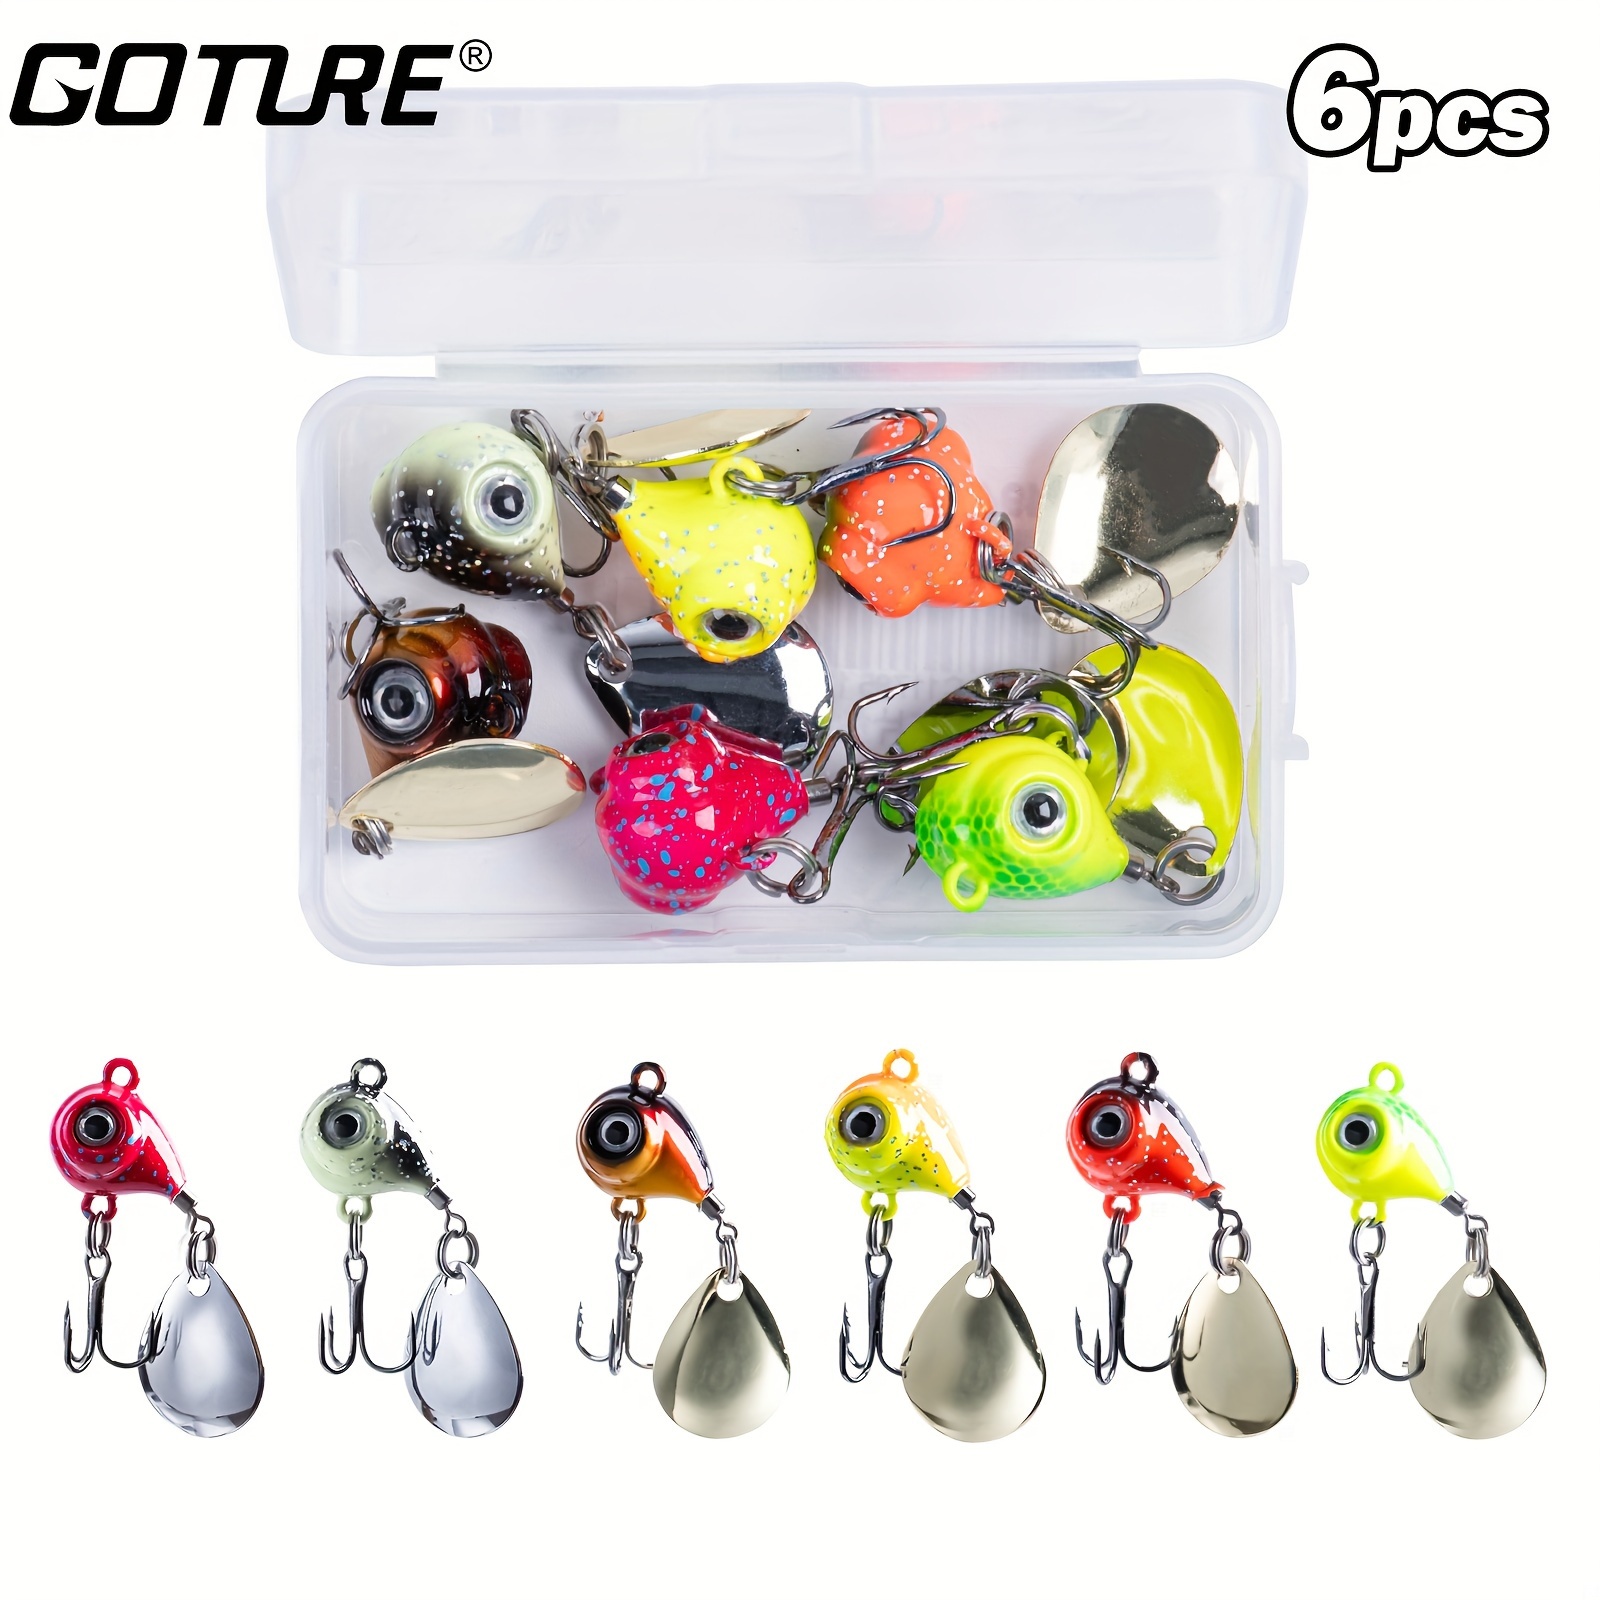 Goture Fishing Spoons Lures,Metal Spoon Trout Lures,Long Distance Casting  Fishing Lures for Trout Bass Crappie Pike Saltwater an